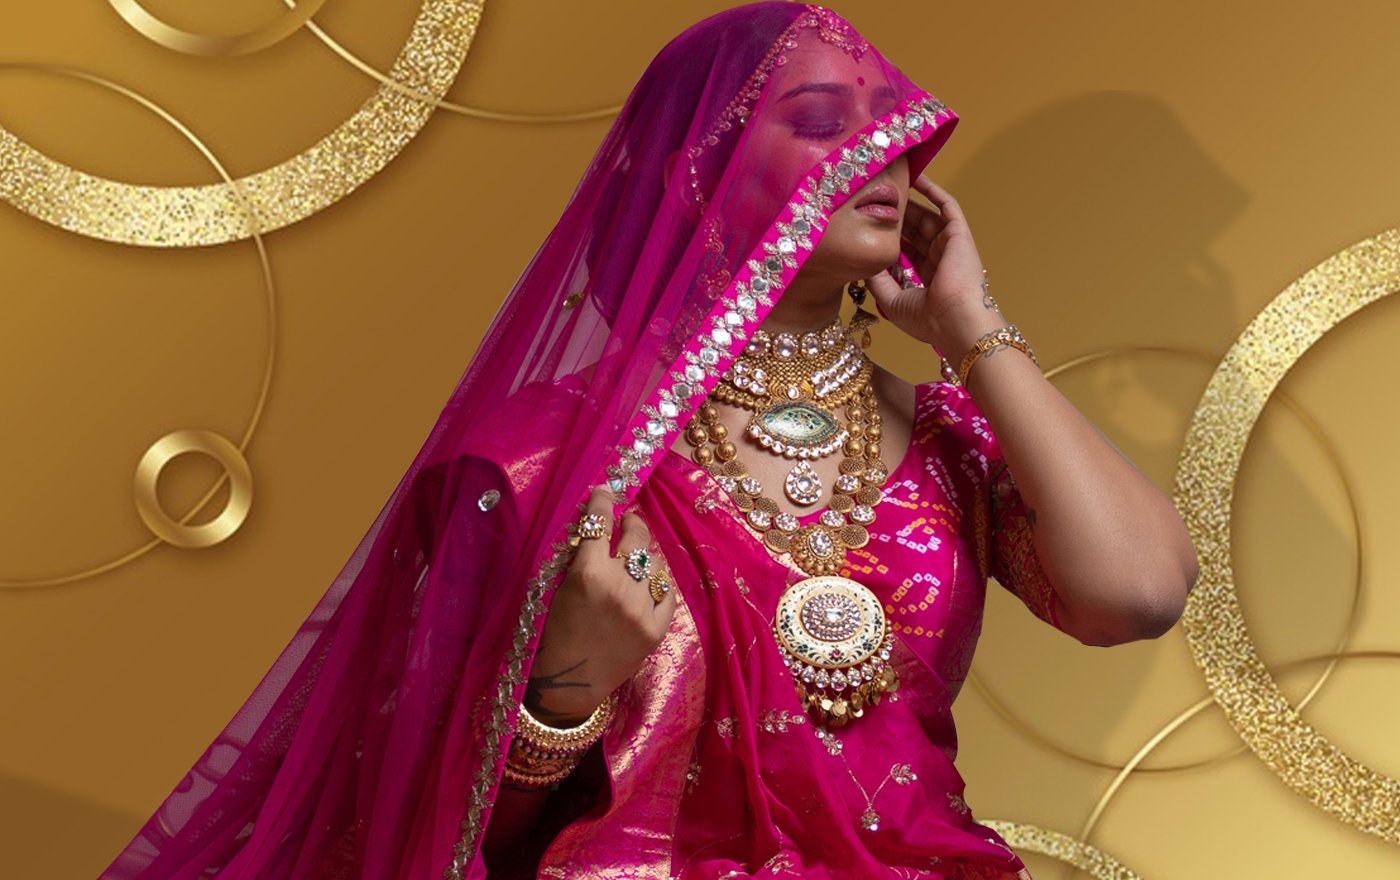 Must-have accessories for this Karva Chauth